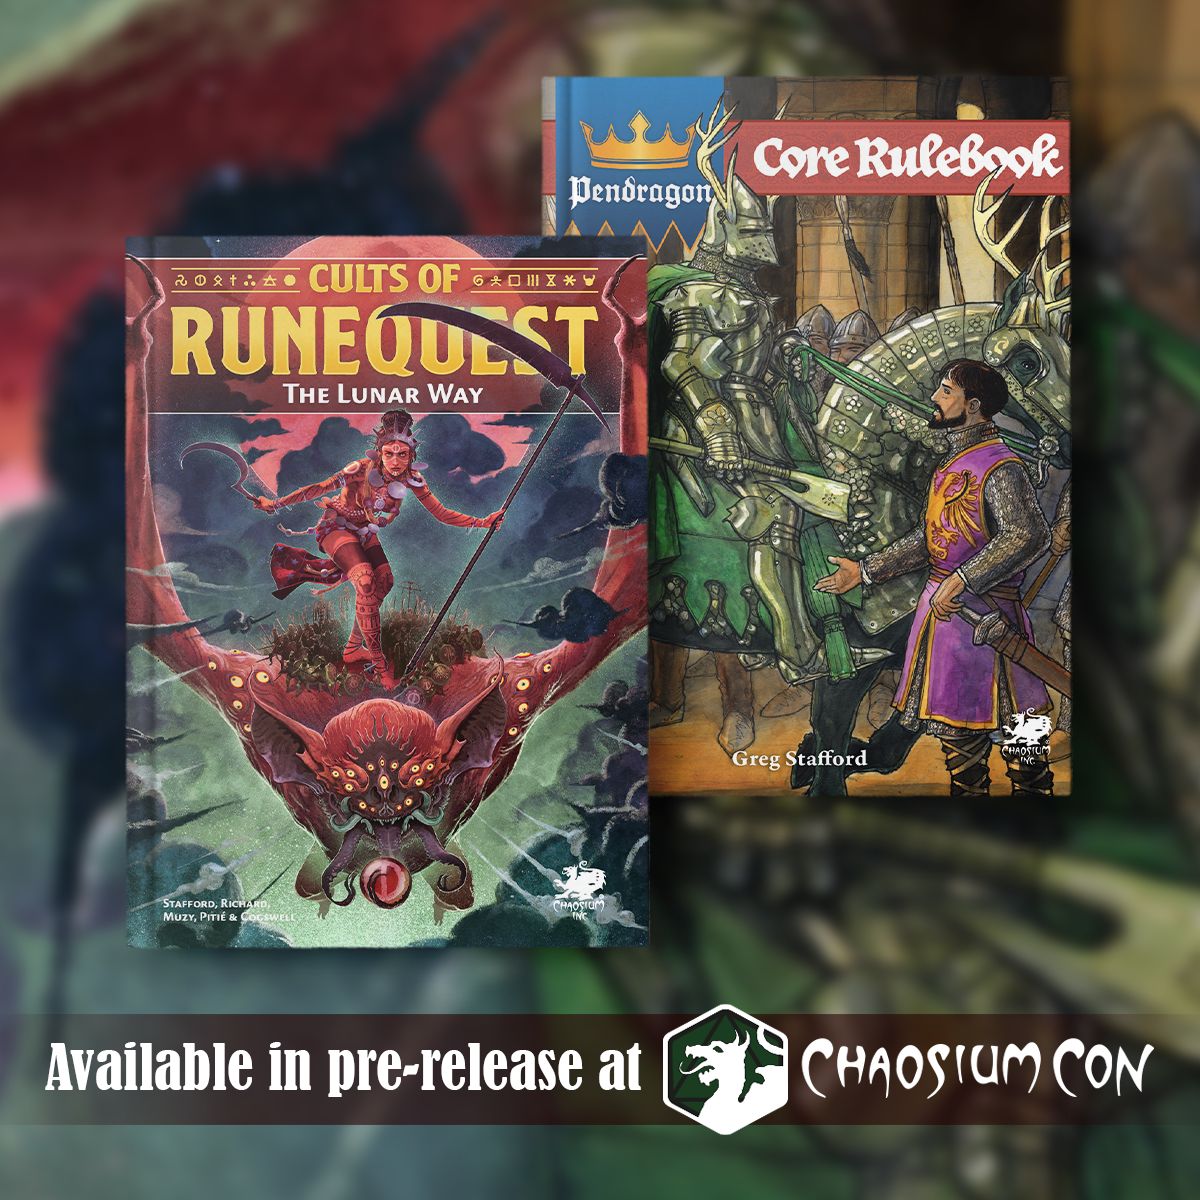 Those attending ChaosiumCon next week will be among the first in the world to be able to purchase Cults of RuneQuest: The Lunar Way, and the Pendragon: Core Rulebook! Both titles will be available in limited quanitites! Which is first on your shopping list?